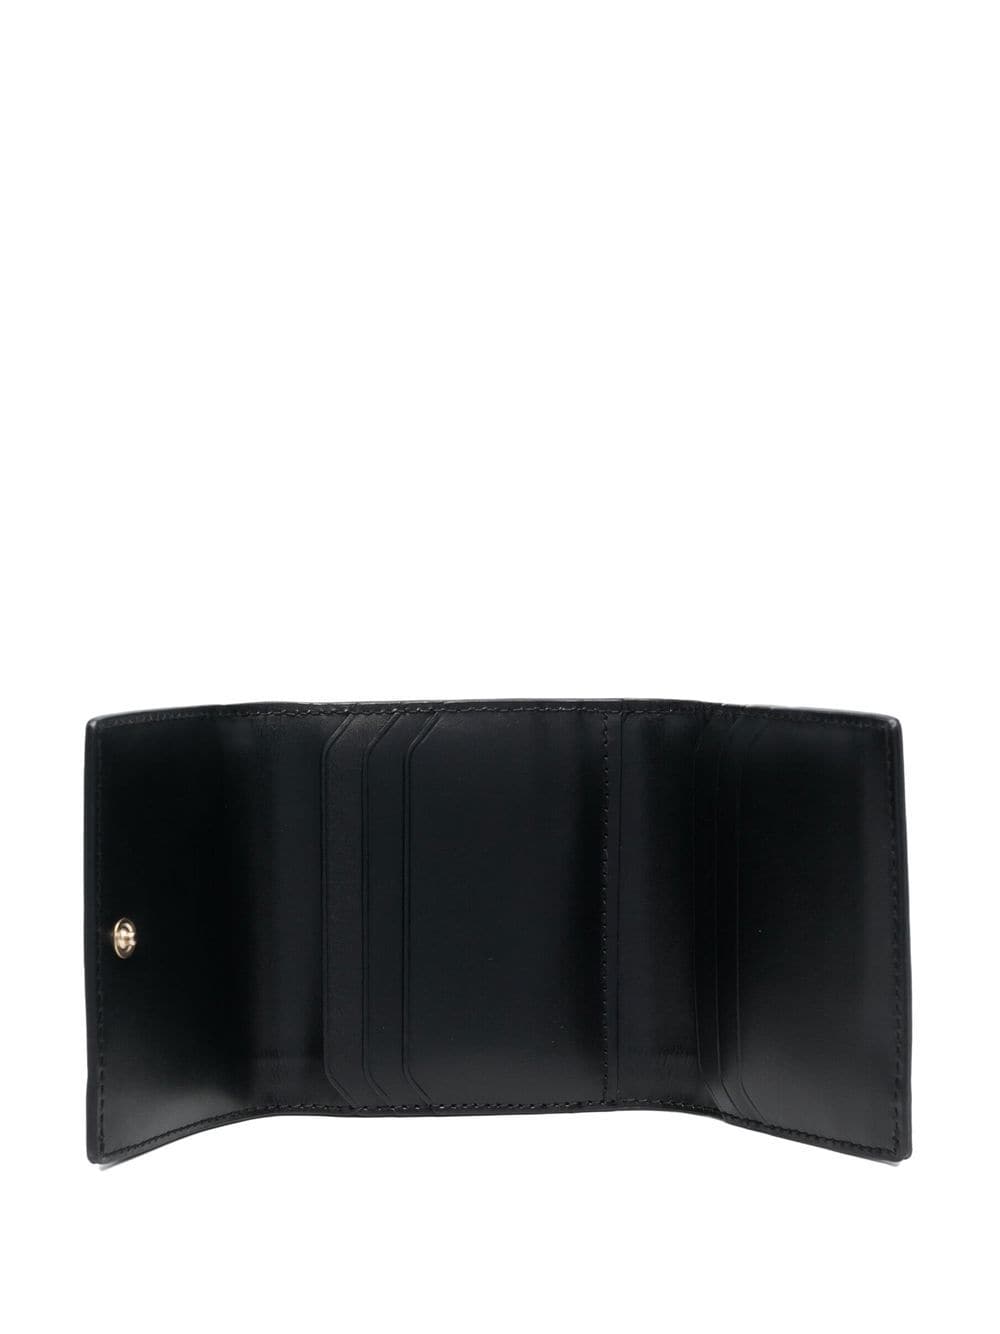 Shop Apc Trifold Leather Wallet In Black